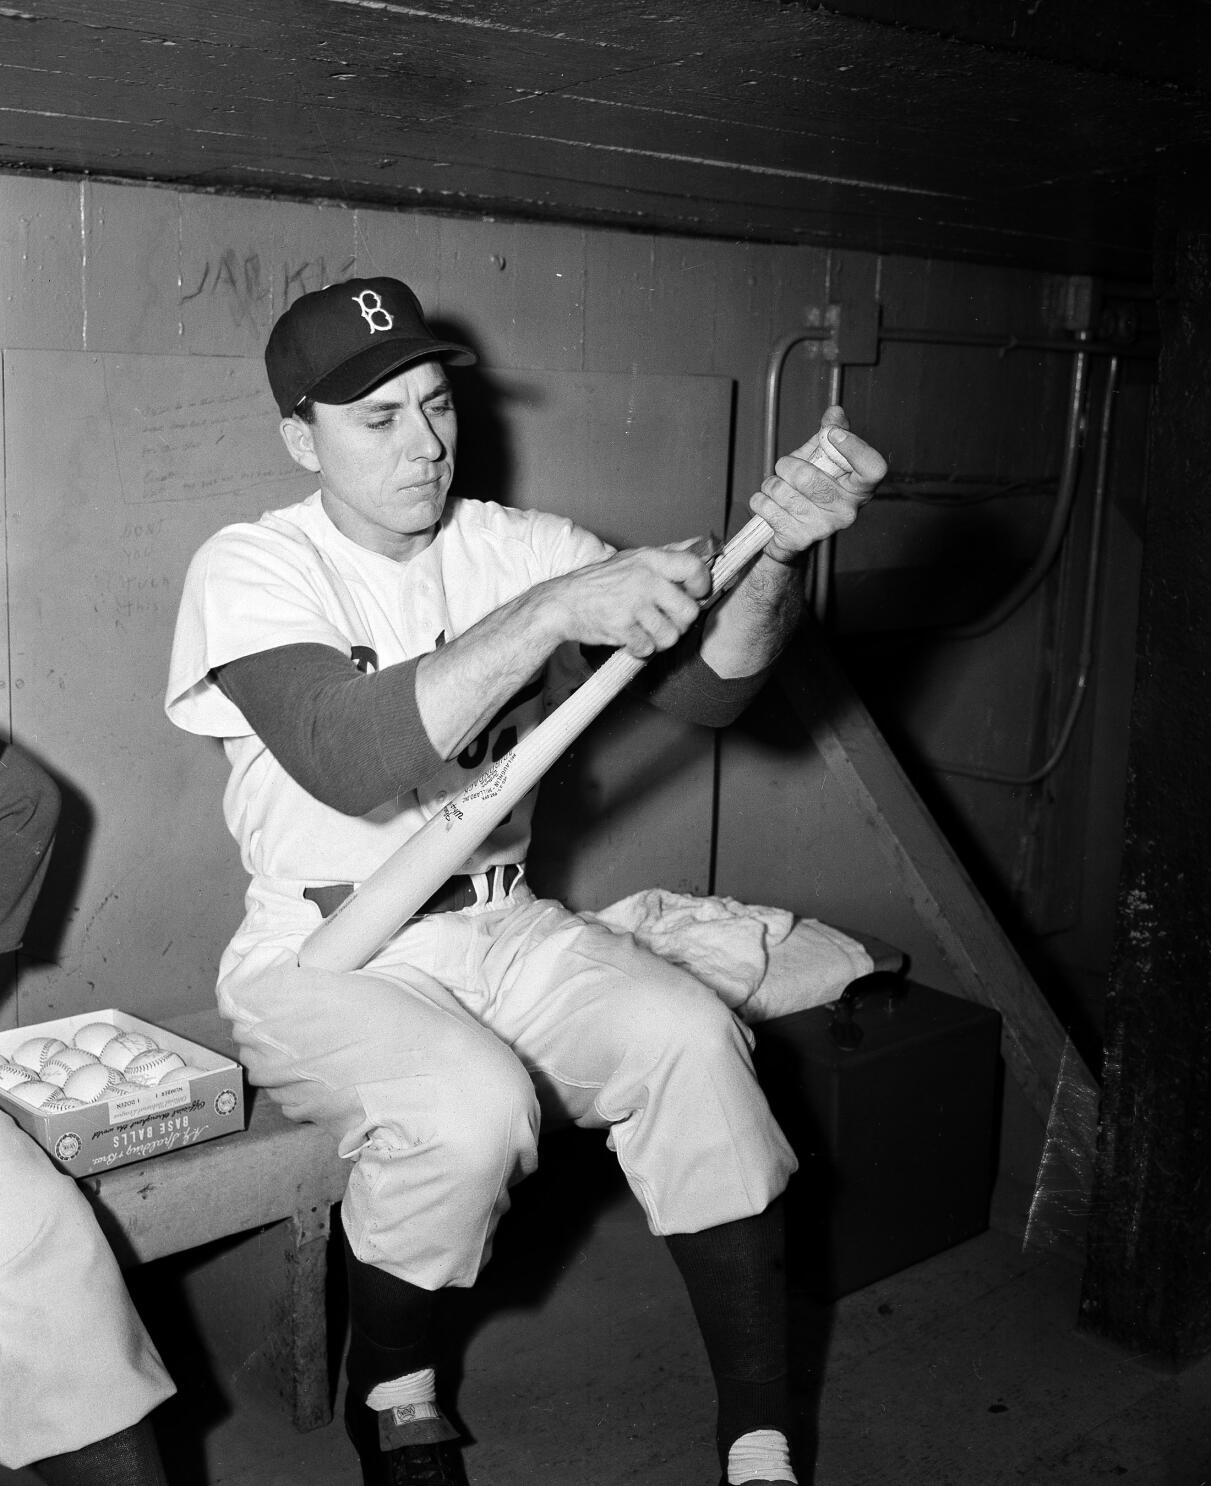 Gil Hodges getting Hall of Fame honor 50 years after death